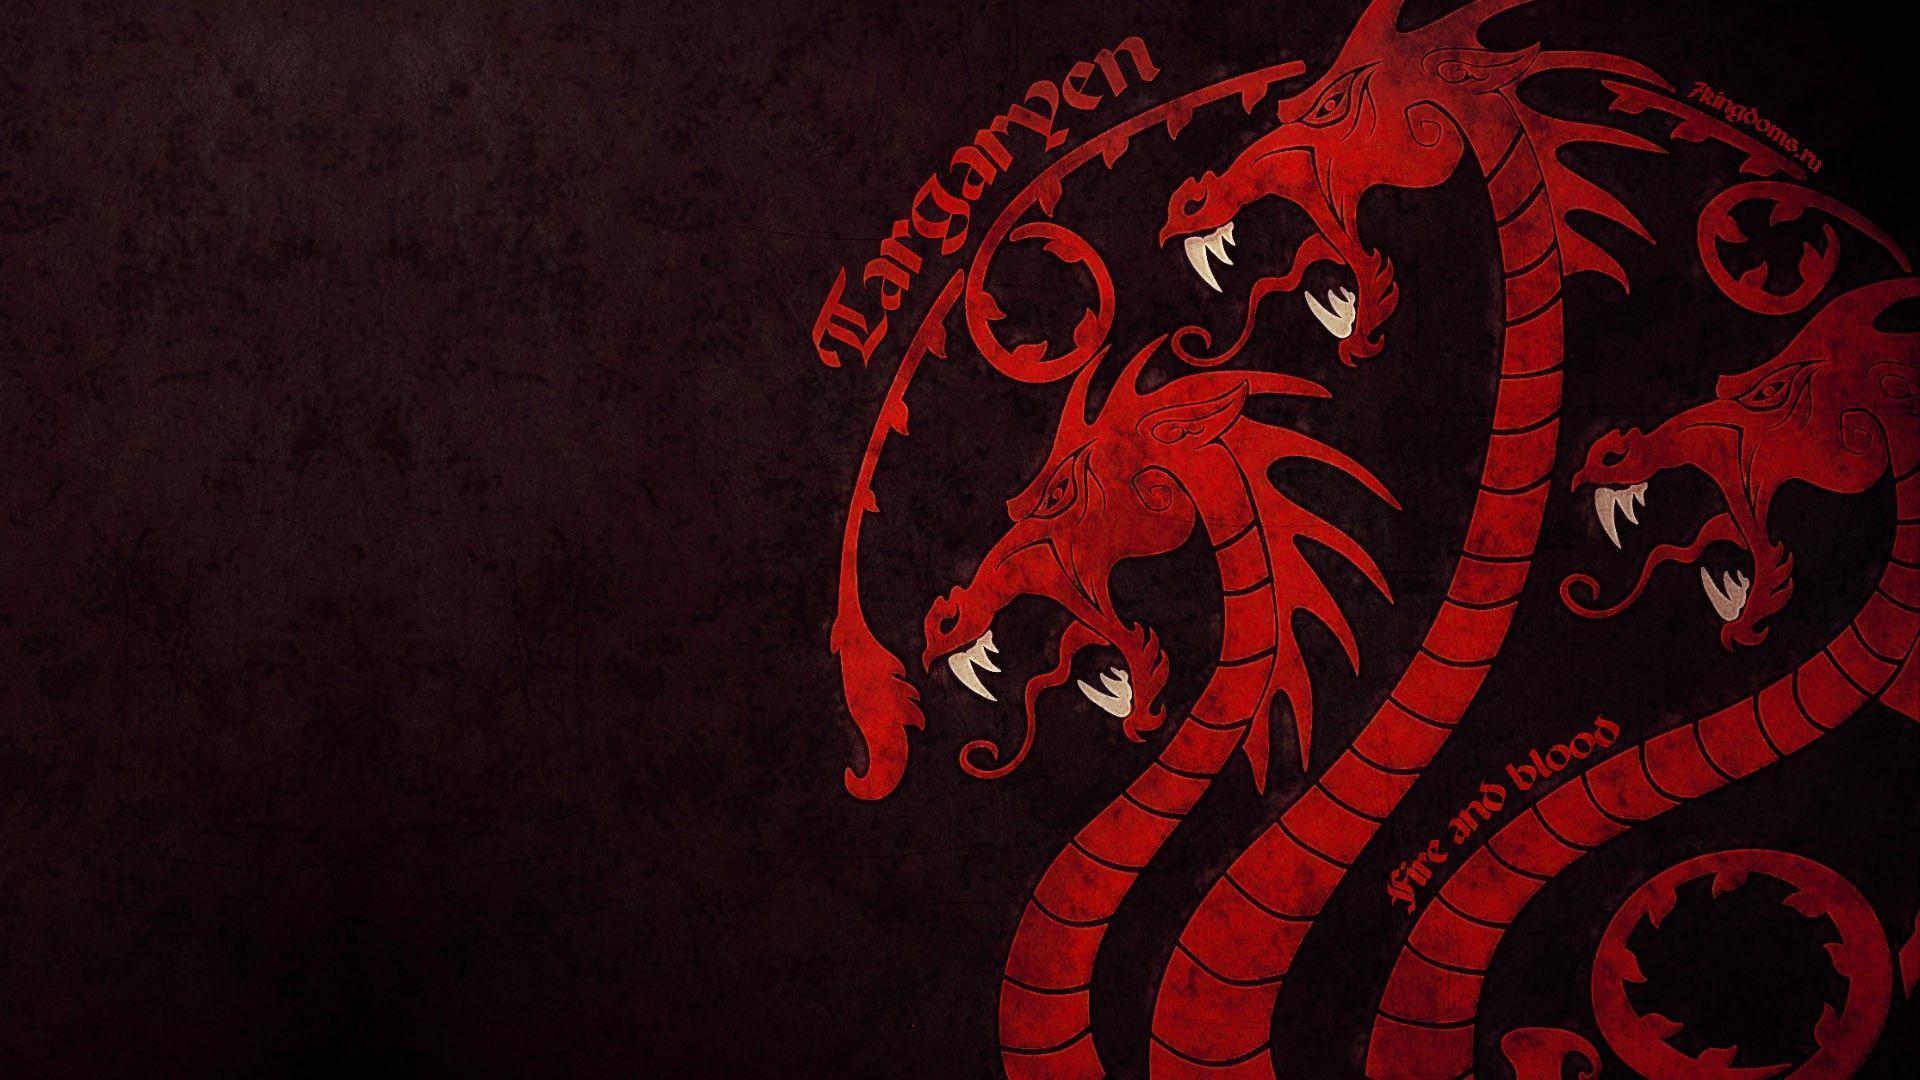 HD Quality Background, Game Of Thrones HD px, Versie